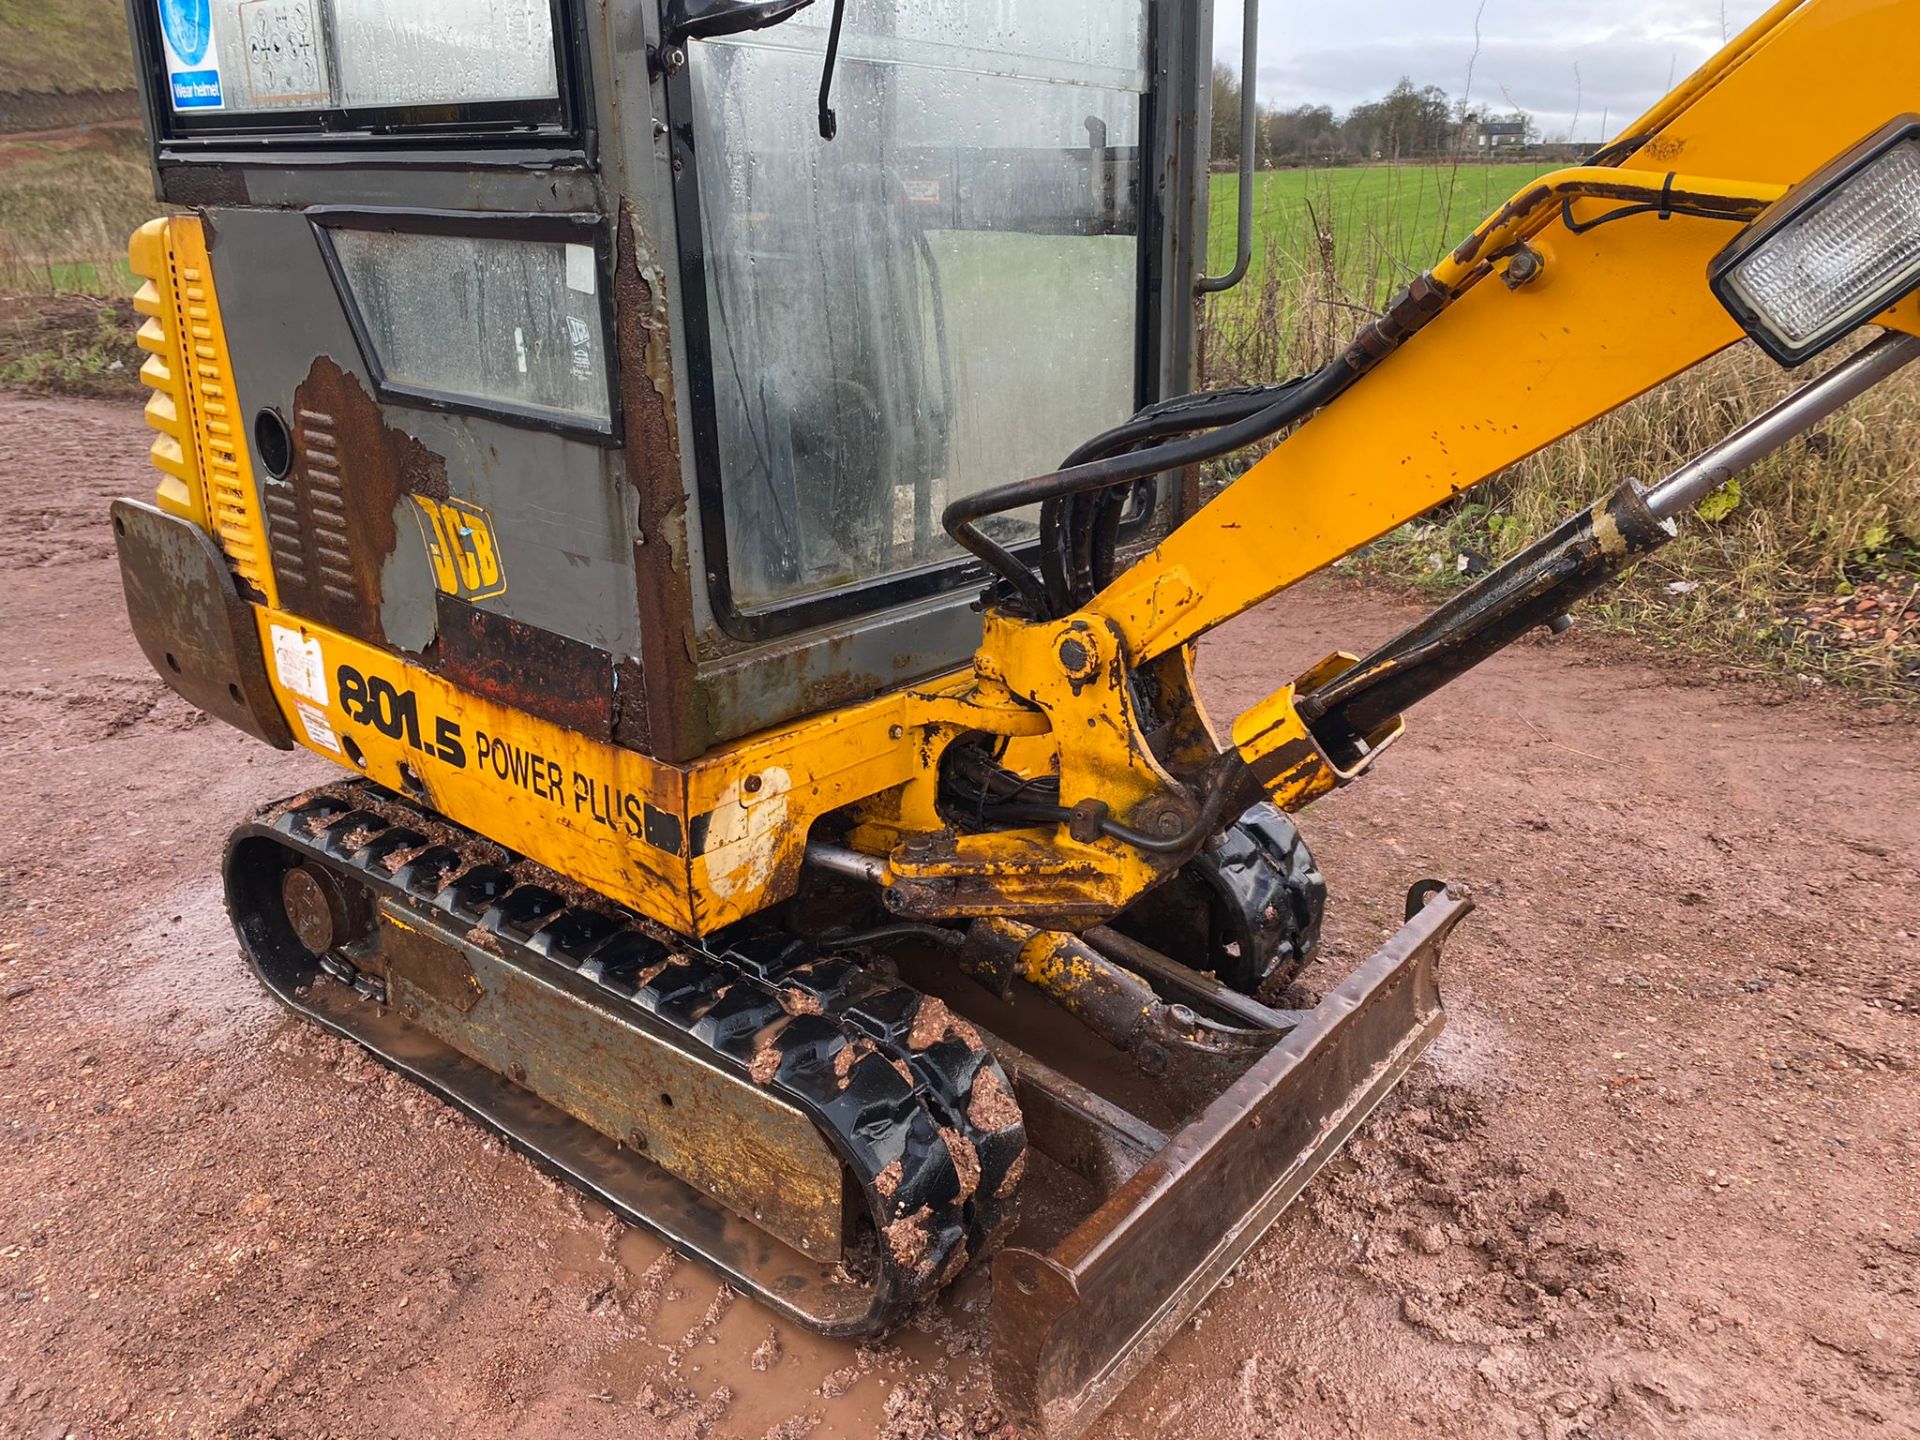 1997 JCB 801.5 POWER PLUS RUBBER TRACKED EXCAVATOR / DIGGER (P744 MVR) *PLUS VAT* - Image 7 of 18